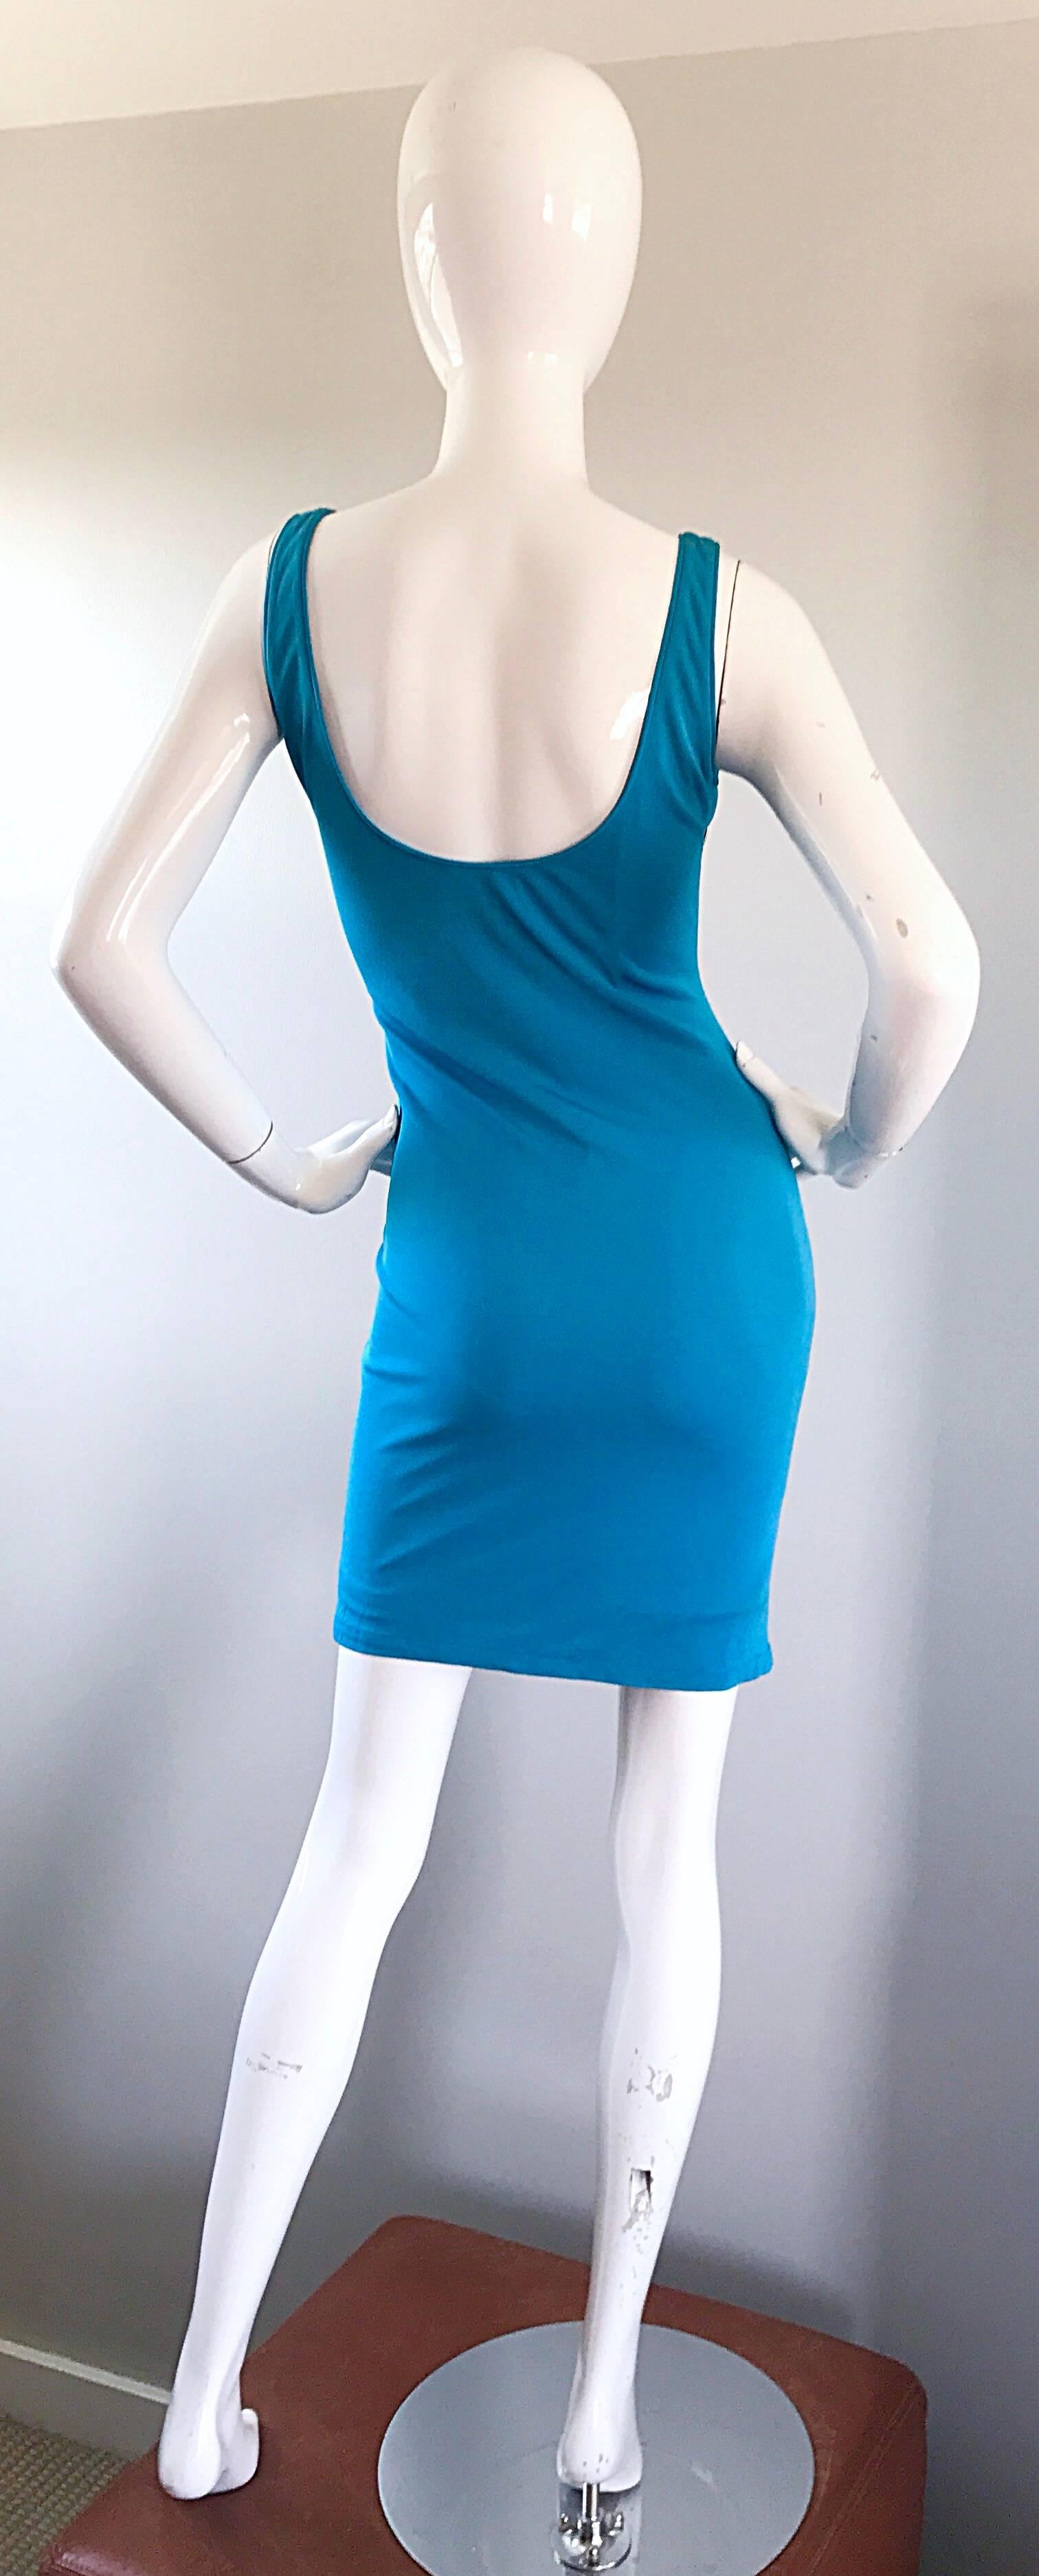 Women's Documented C.D. Greene Turquoise Teal Blue Vintage Mirrored Bodycon Beaded Dress